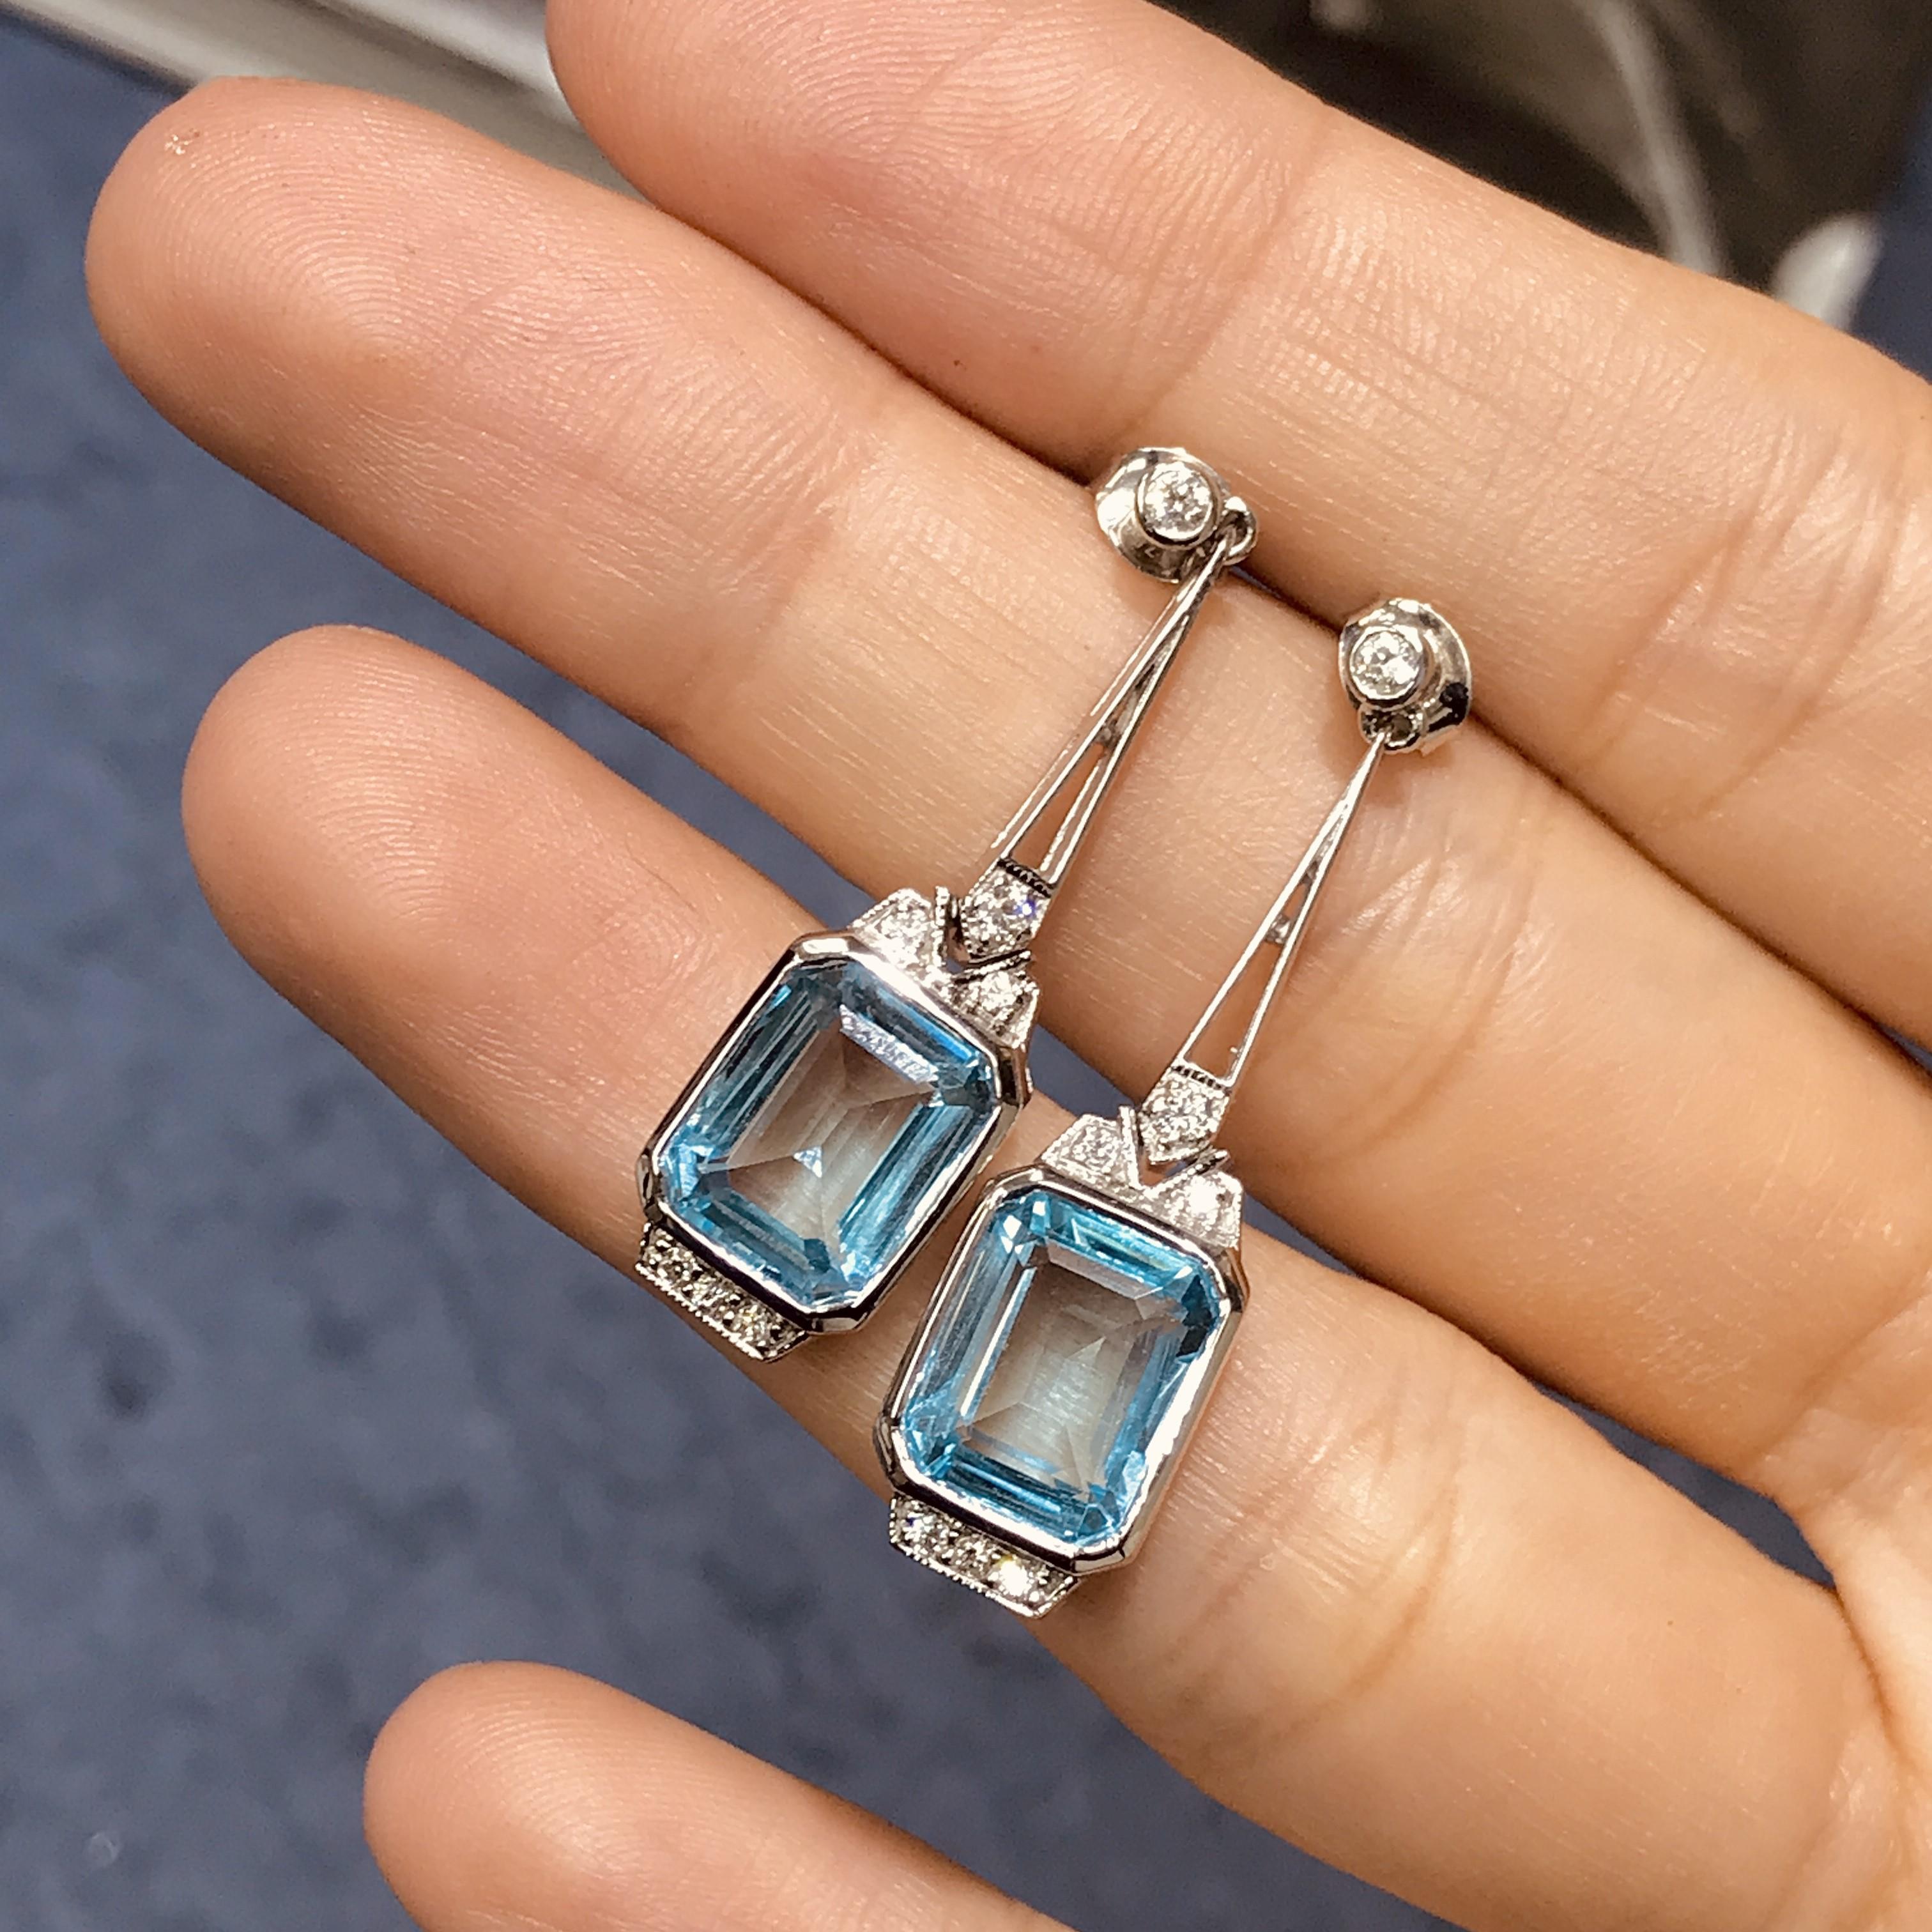 Top off your look with this spectacular pair of earrings. Coordinate them with your favorite outfit for a brilliant and lively appearance. The top of the solitaire drop earrings shows a beautiful cluster of round diamonds, in which the stunning